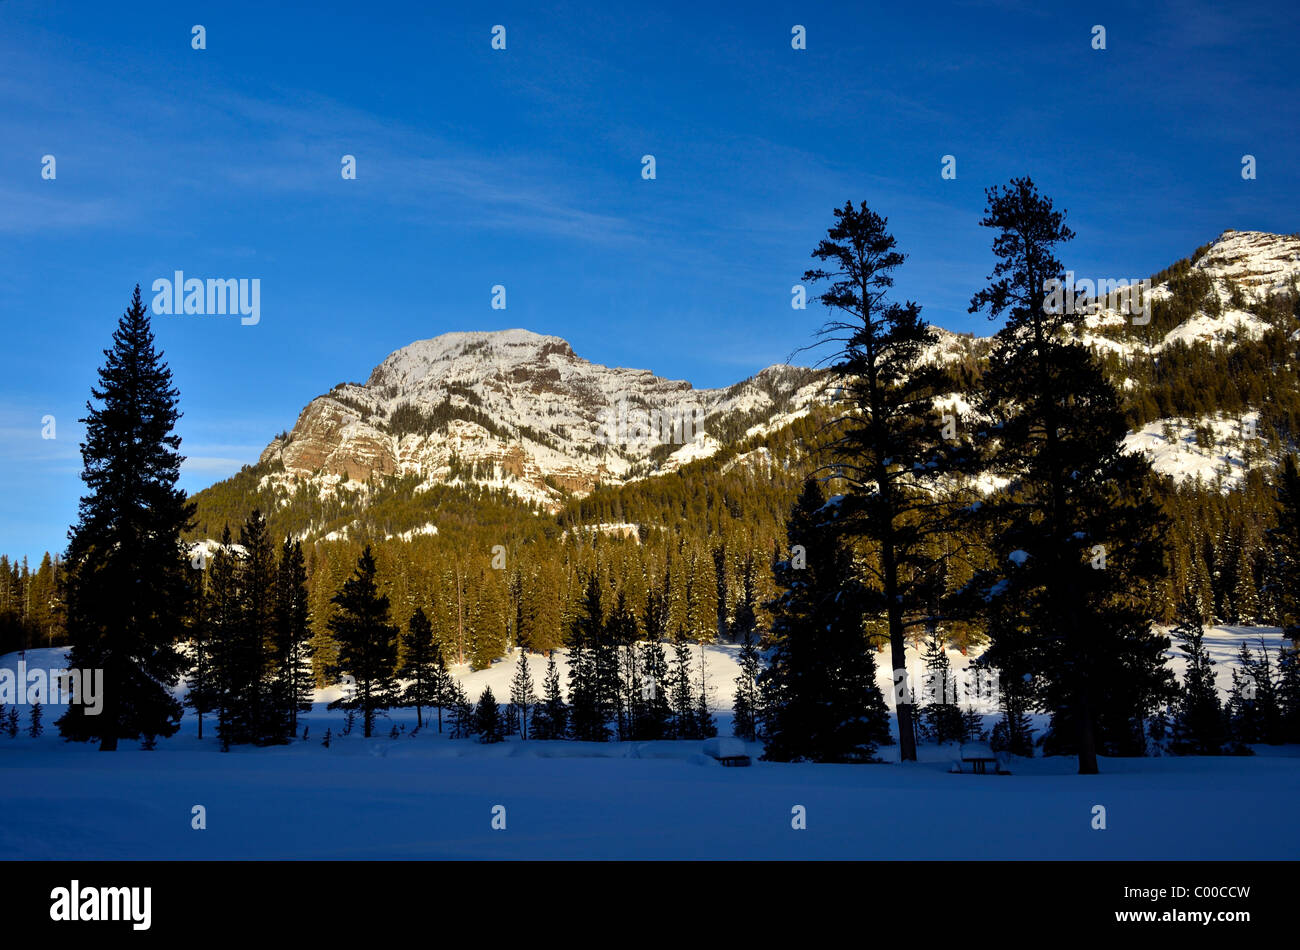 Mountains in Lamar Valley, Yellowstone National Park, Wyoming, USA. Stock Photo